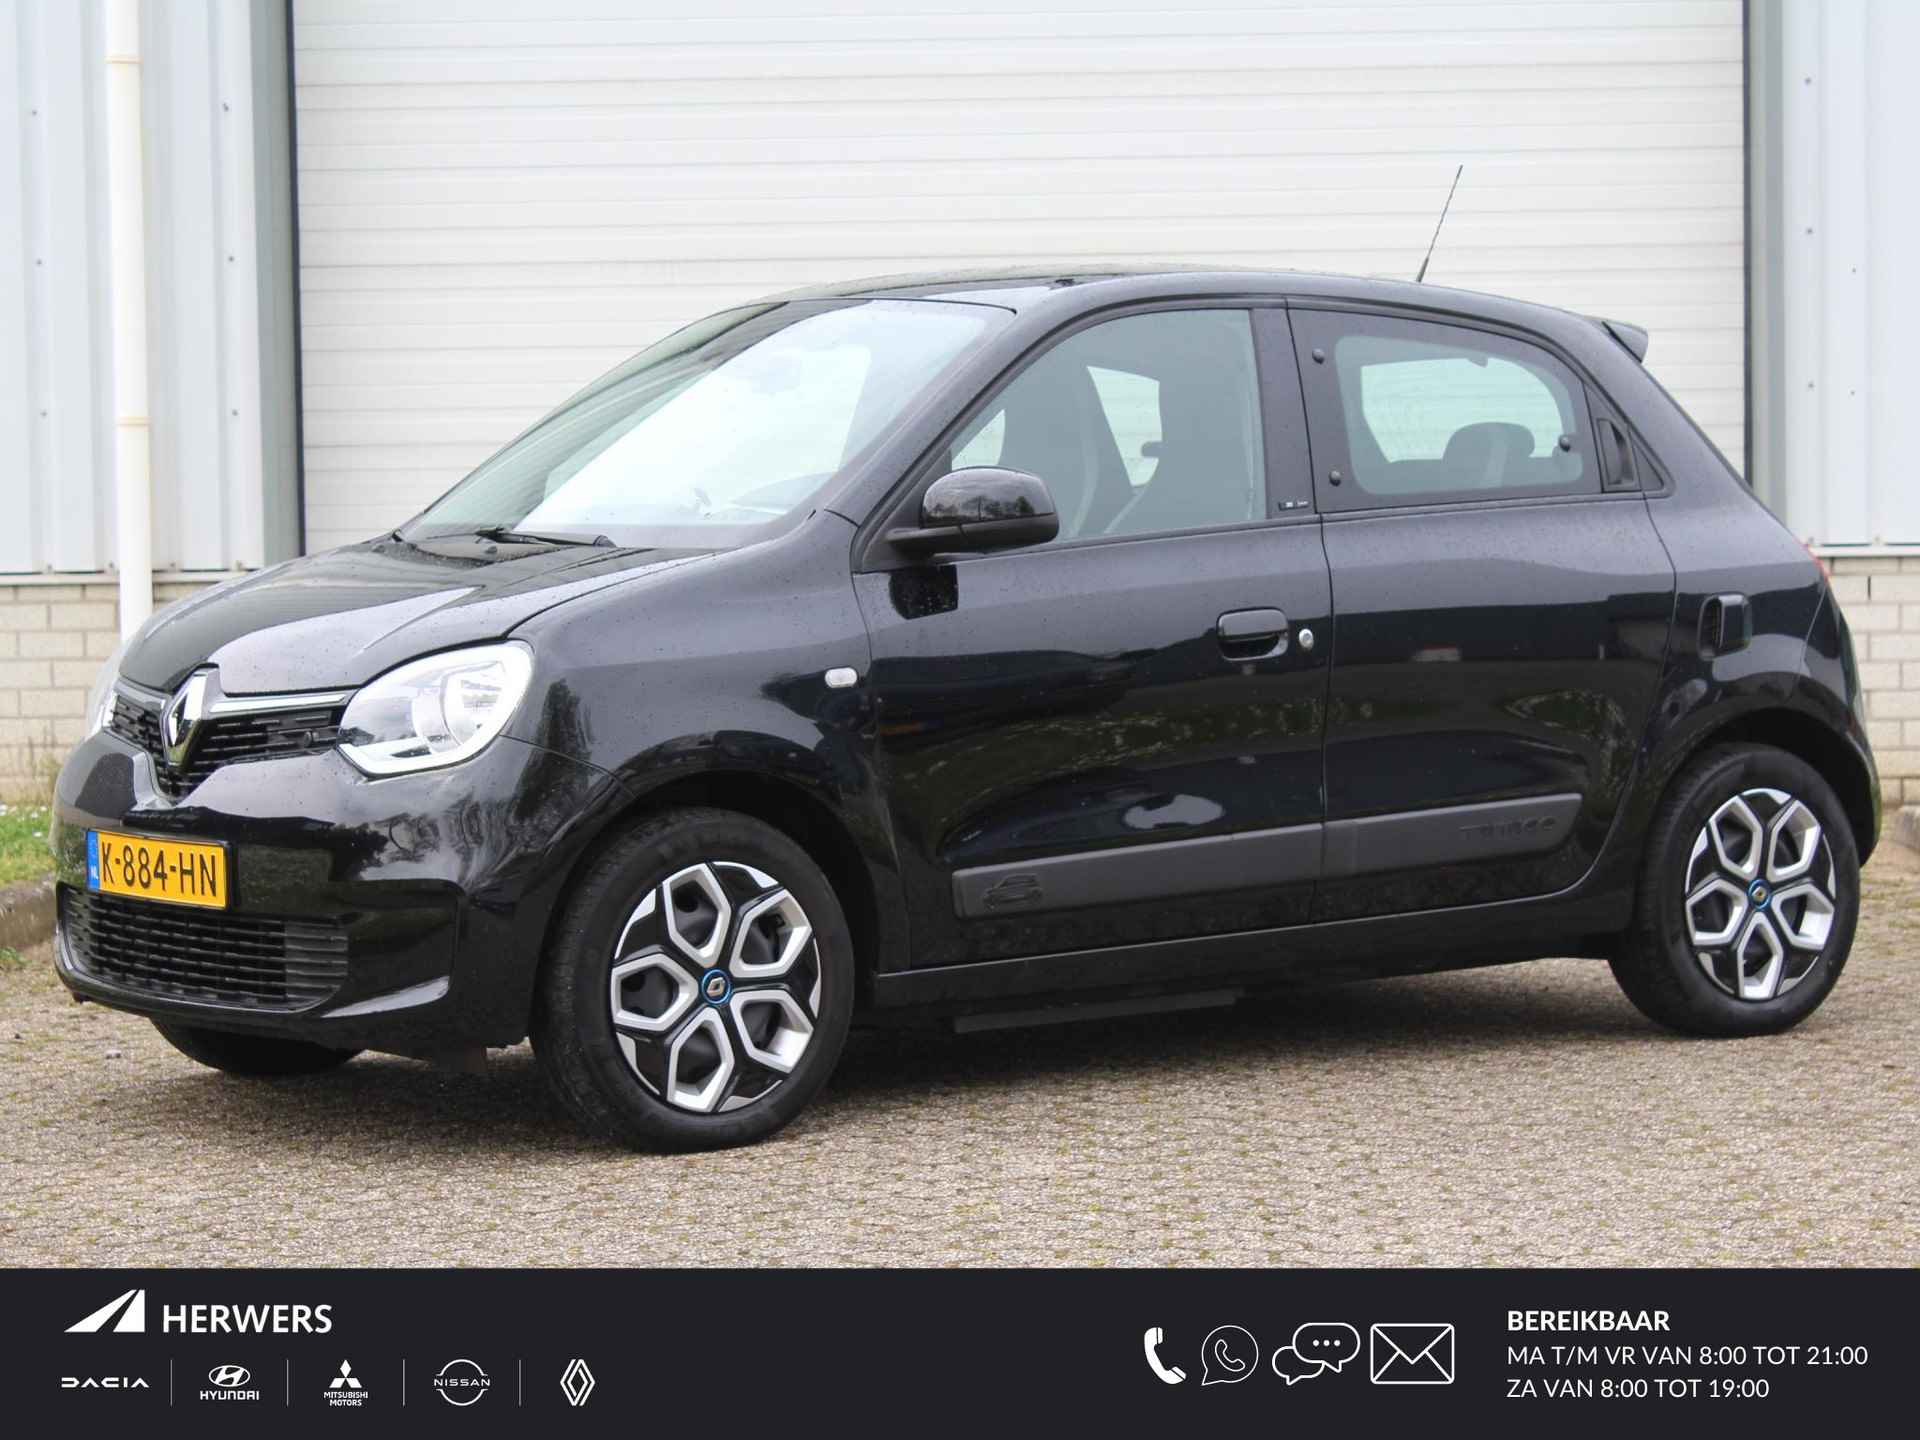 Renault Twingo Z.E. R80 Collection / SUBSIDIE  € 2000,- mogelijk / AUTOMAAT / Navigatiesysteem / Airco / Apple Car Play & Android Auto / DAB / Led dagrijverlichting / Metaalkleur / Cruise control - 1/47